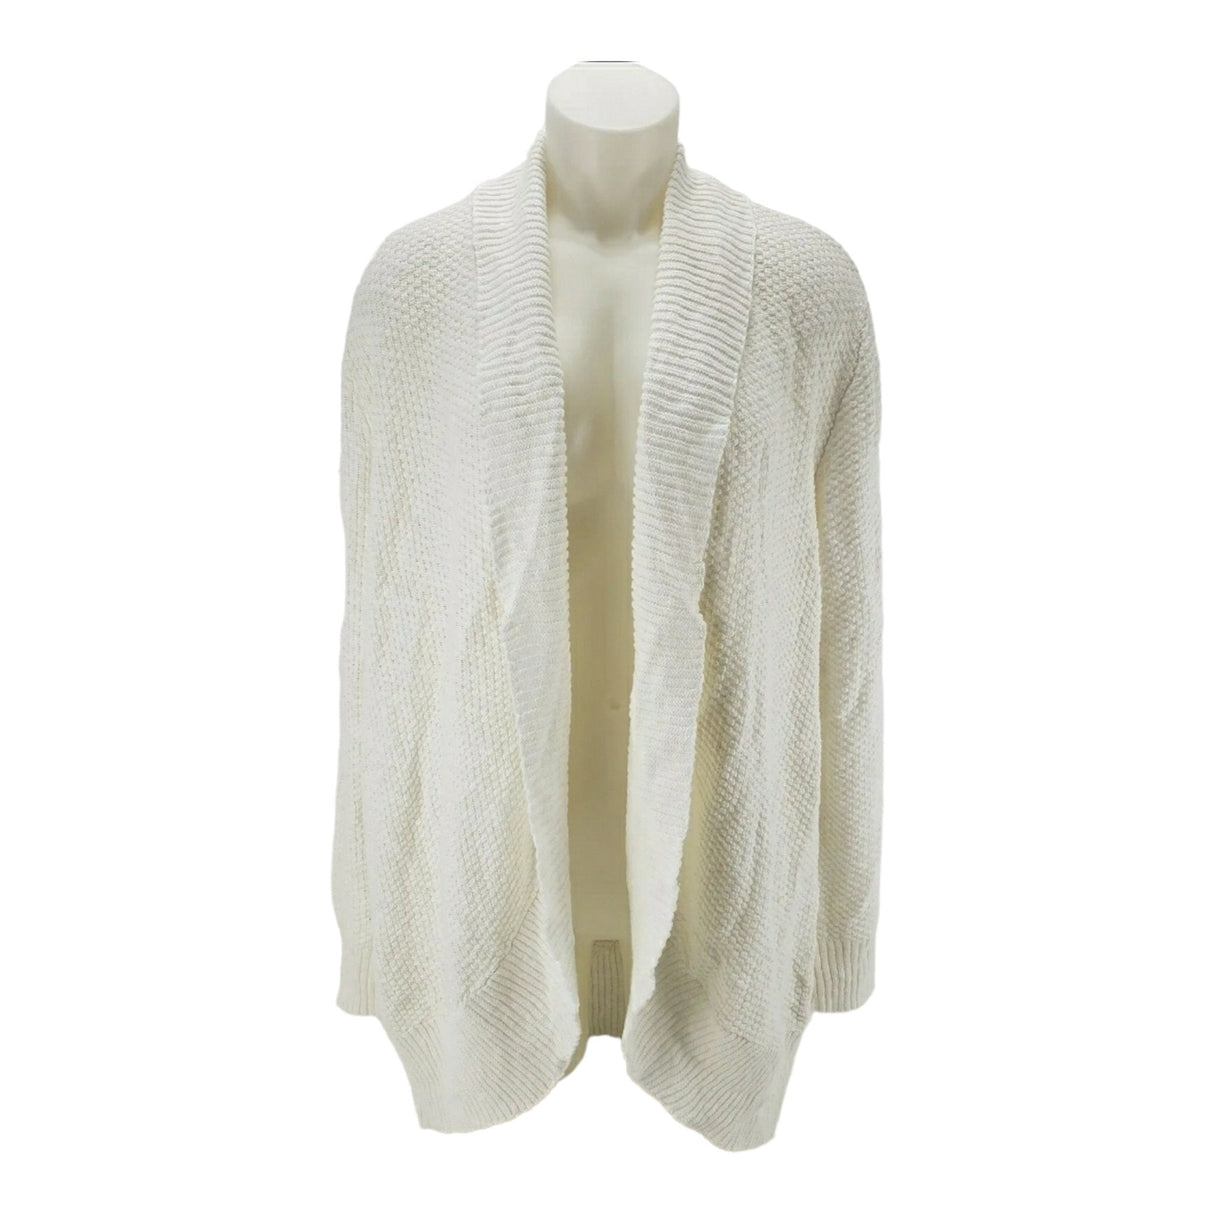 NEW Style&co Large Womens Cardigan Sweater Long Sleeve Open Front Ivory - BELLEZA'S - NEW Style&co Large Womens Cardigan Sweater Long Sleeve Open Front Ivory - BELLEZA'S - Sweater -